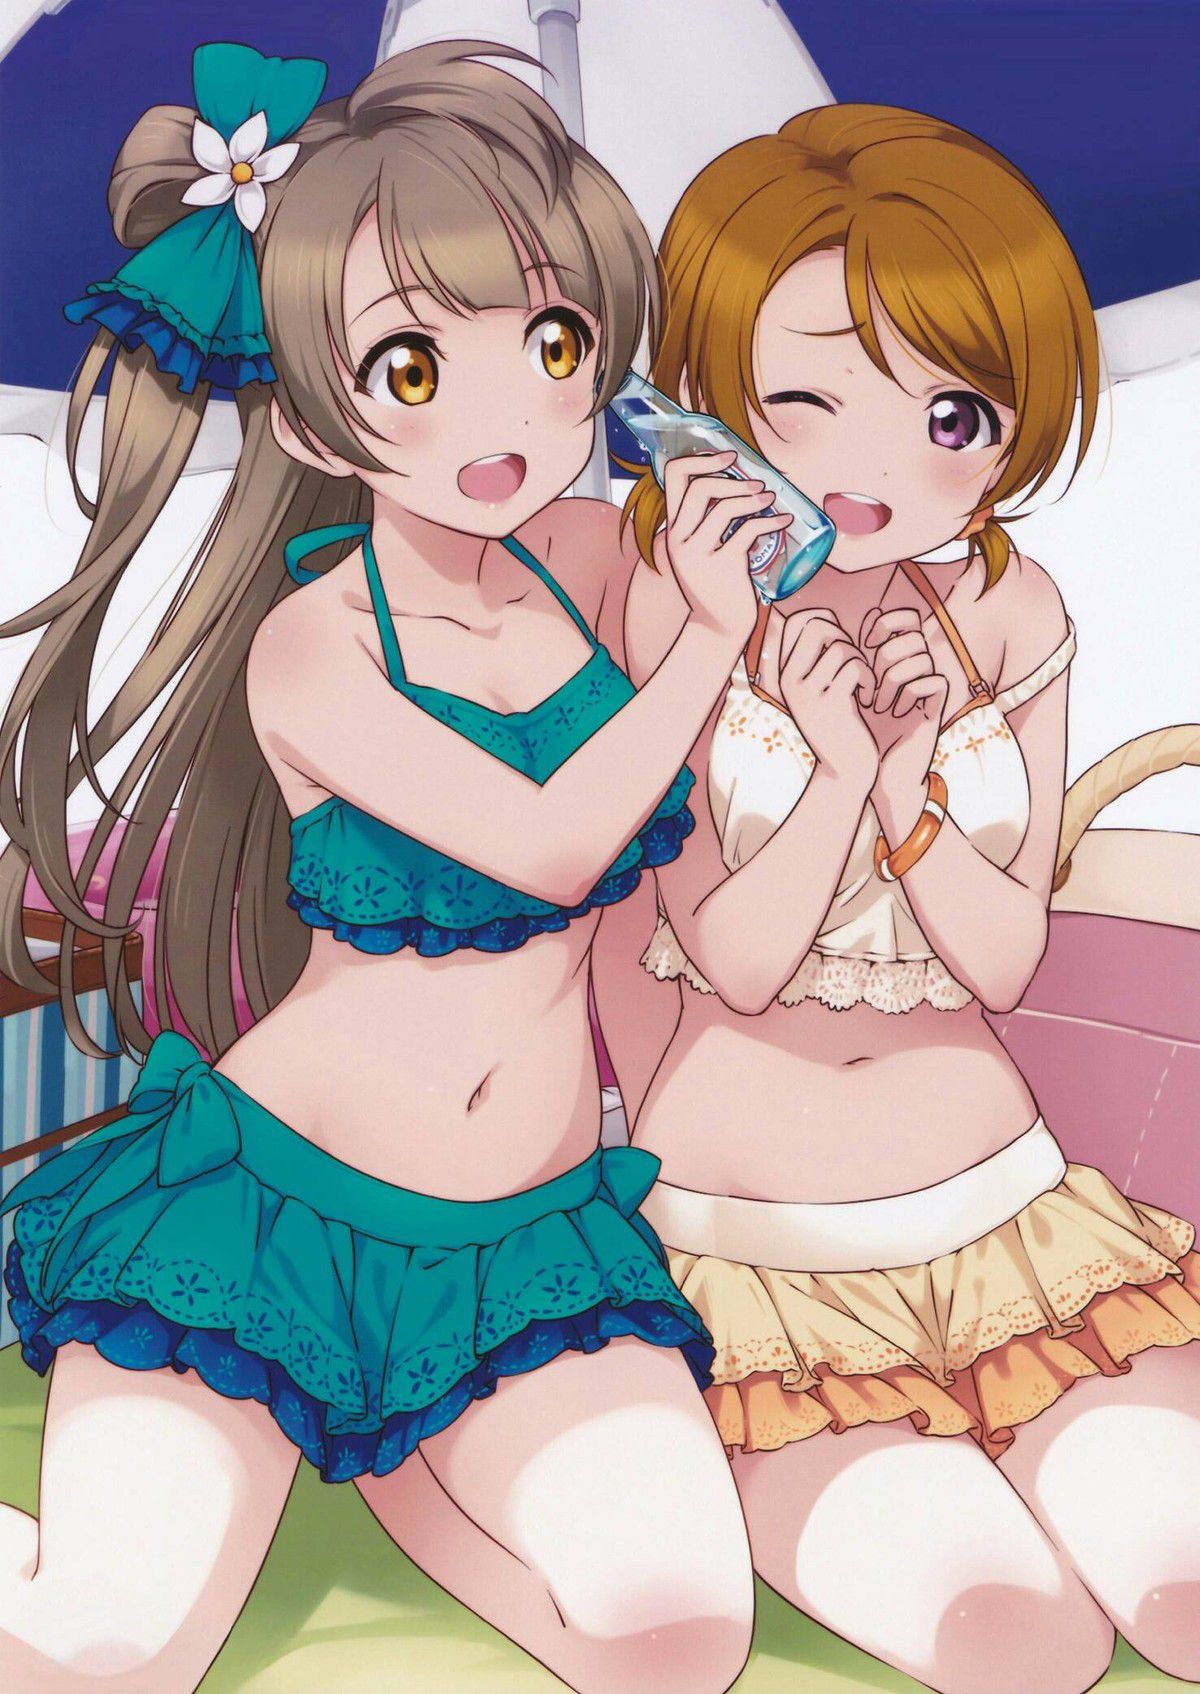 [Goddess images] "love live! "Of or's Chin as erotic pretty unspectacular as good girls become mothers is not www 1